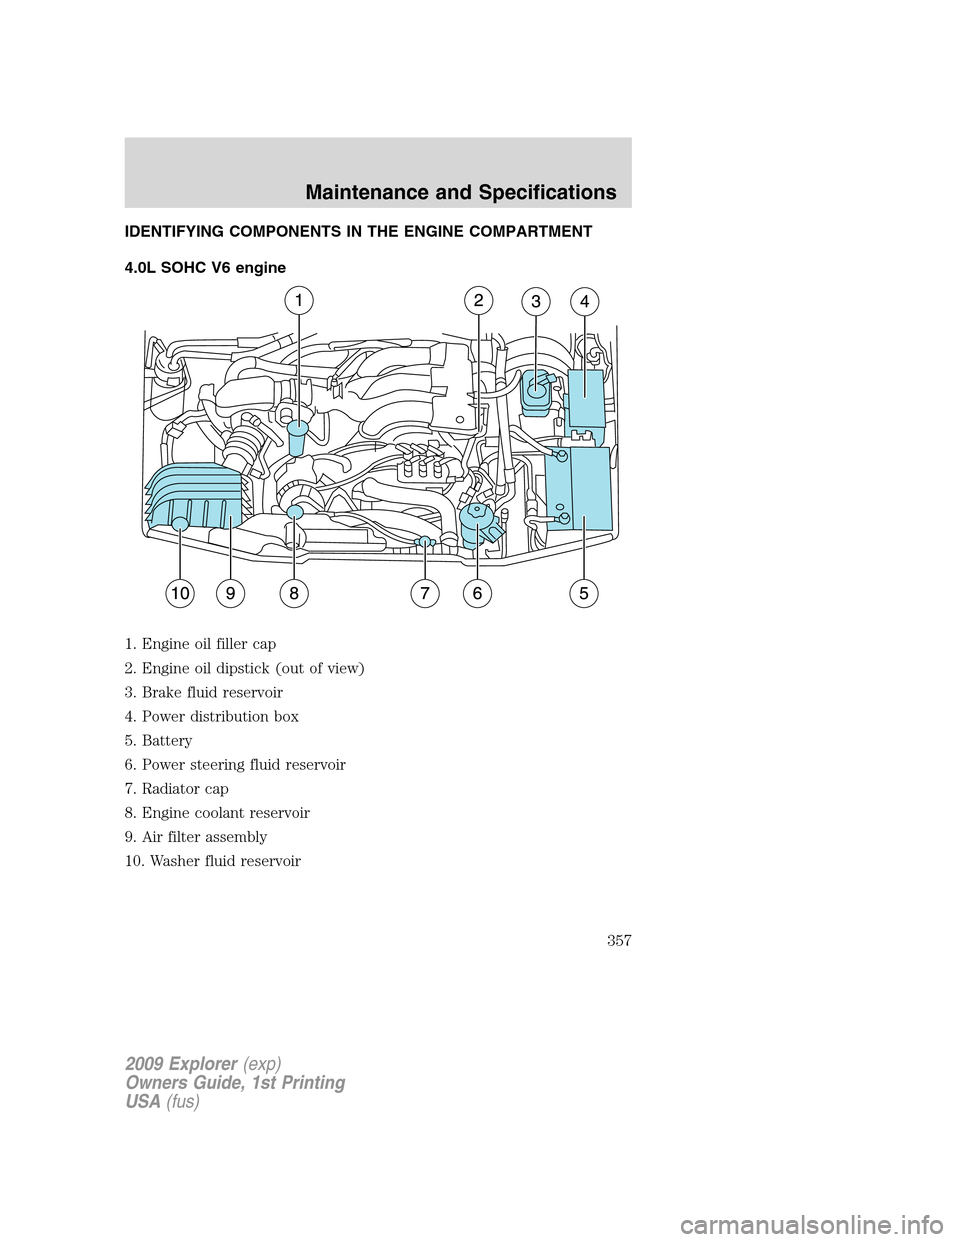 FORD EXPLORER 2009 4.G Owners Manual IDENTIFYING COMPONENTS IN THE ENGINE COMPARTMENT
4.0L SOHC V6 engine
1. Engine oil filler cap
2. Engine oil dipstick (out of view)
3. Brake fluid reservoir
4. Power distribution box
5. Battery
6. Powe